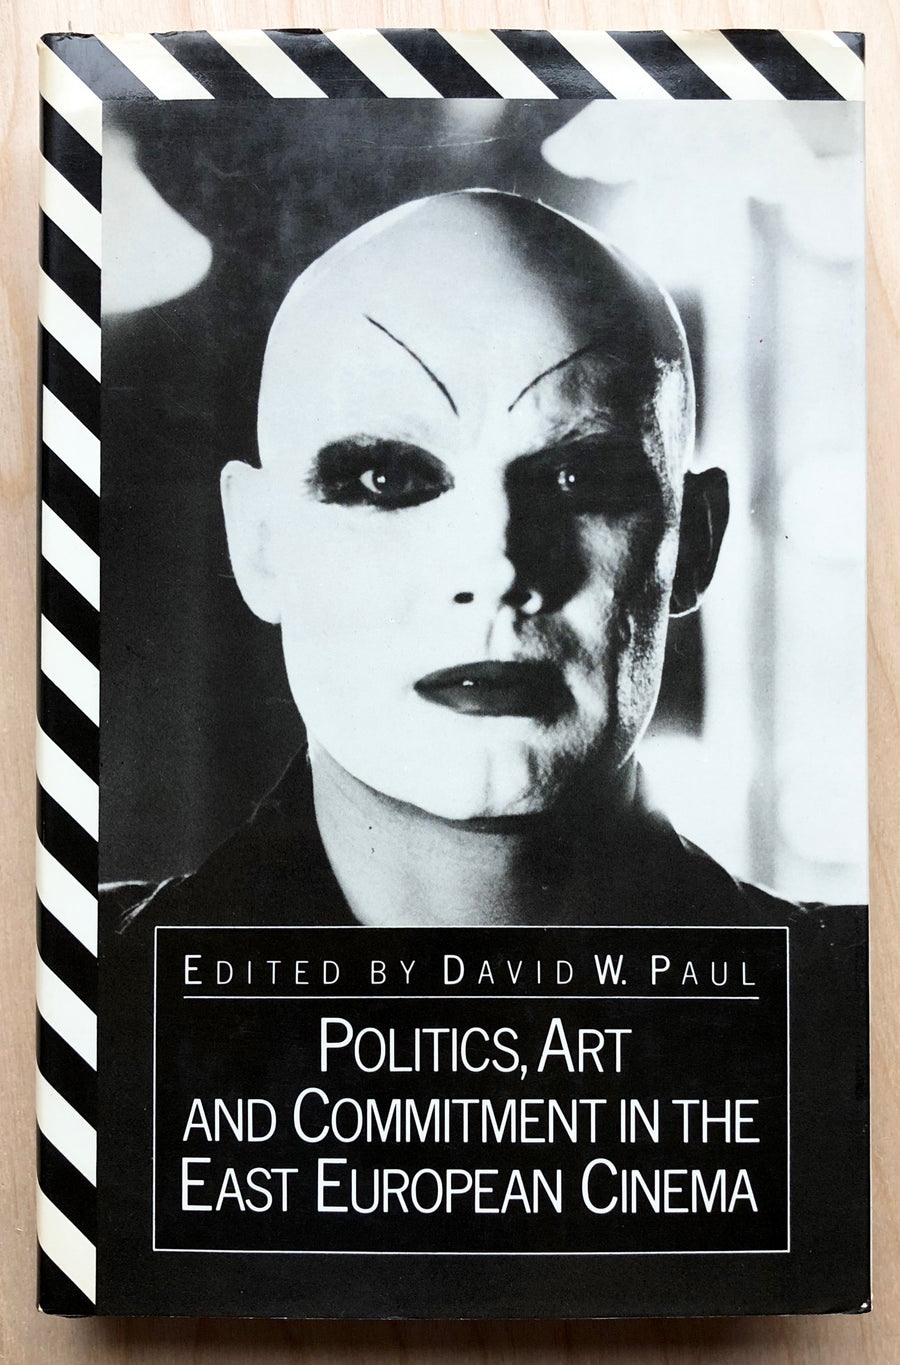 POLITICS, ART AND COMMITMENT IN THE EAST EUROPEAN CINEMA edited by David W. Paul